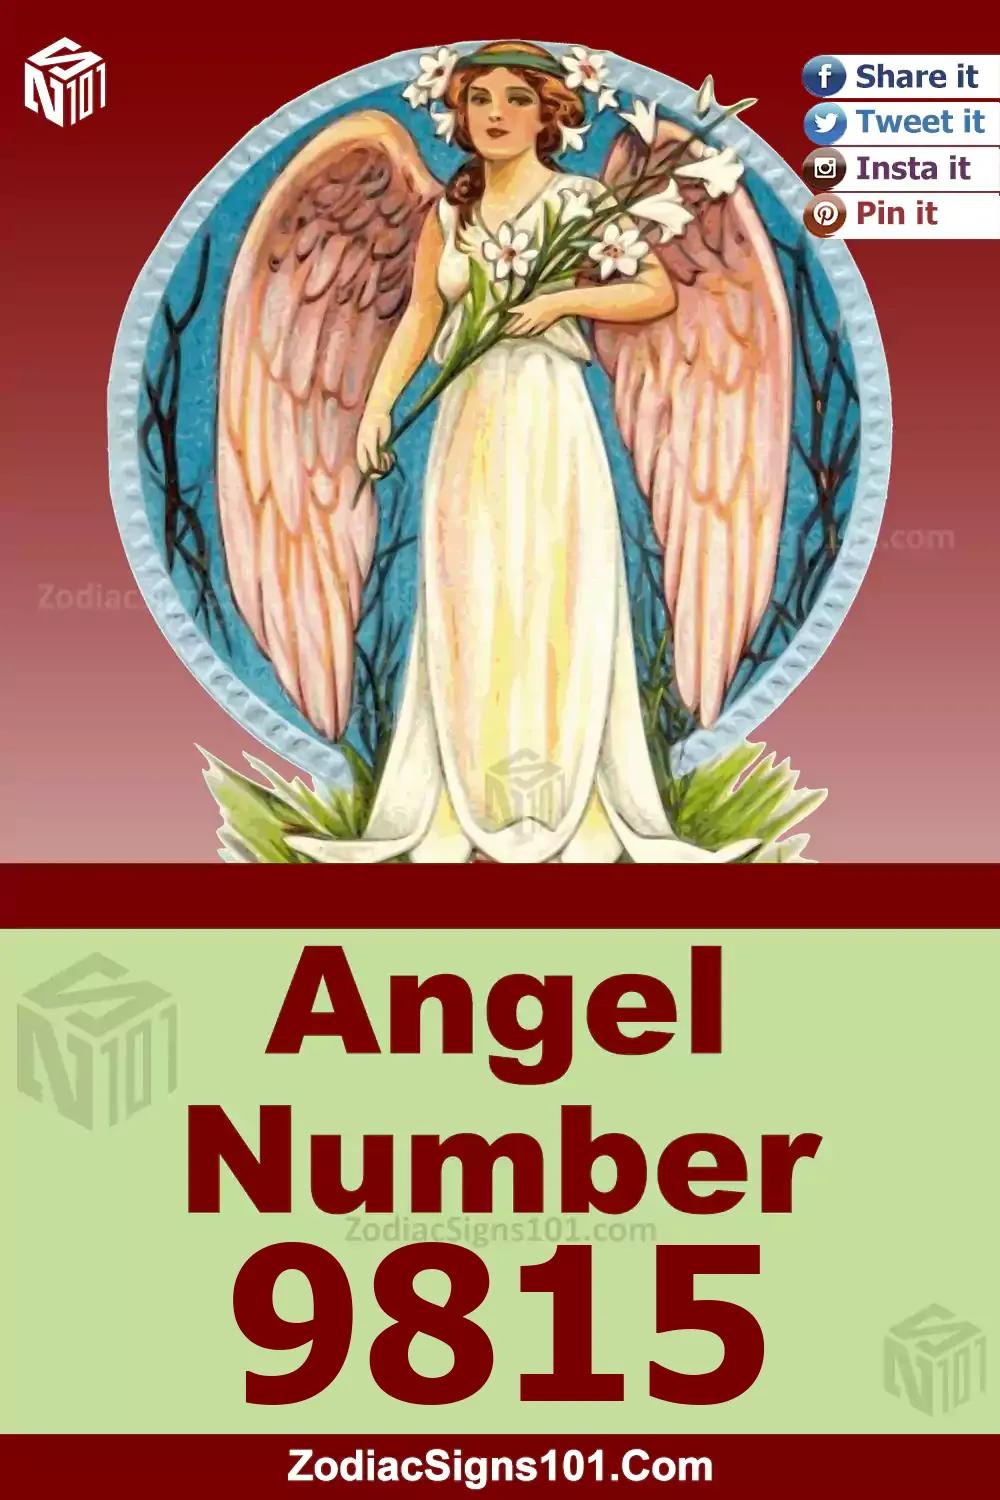 9815 Angel Number Meaning